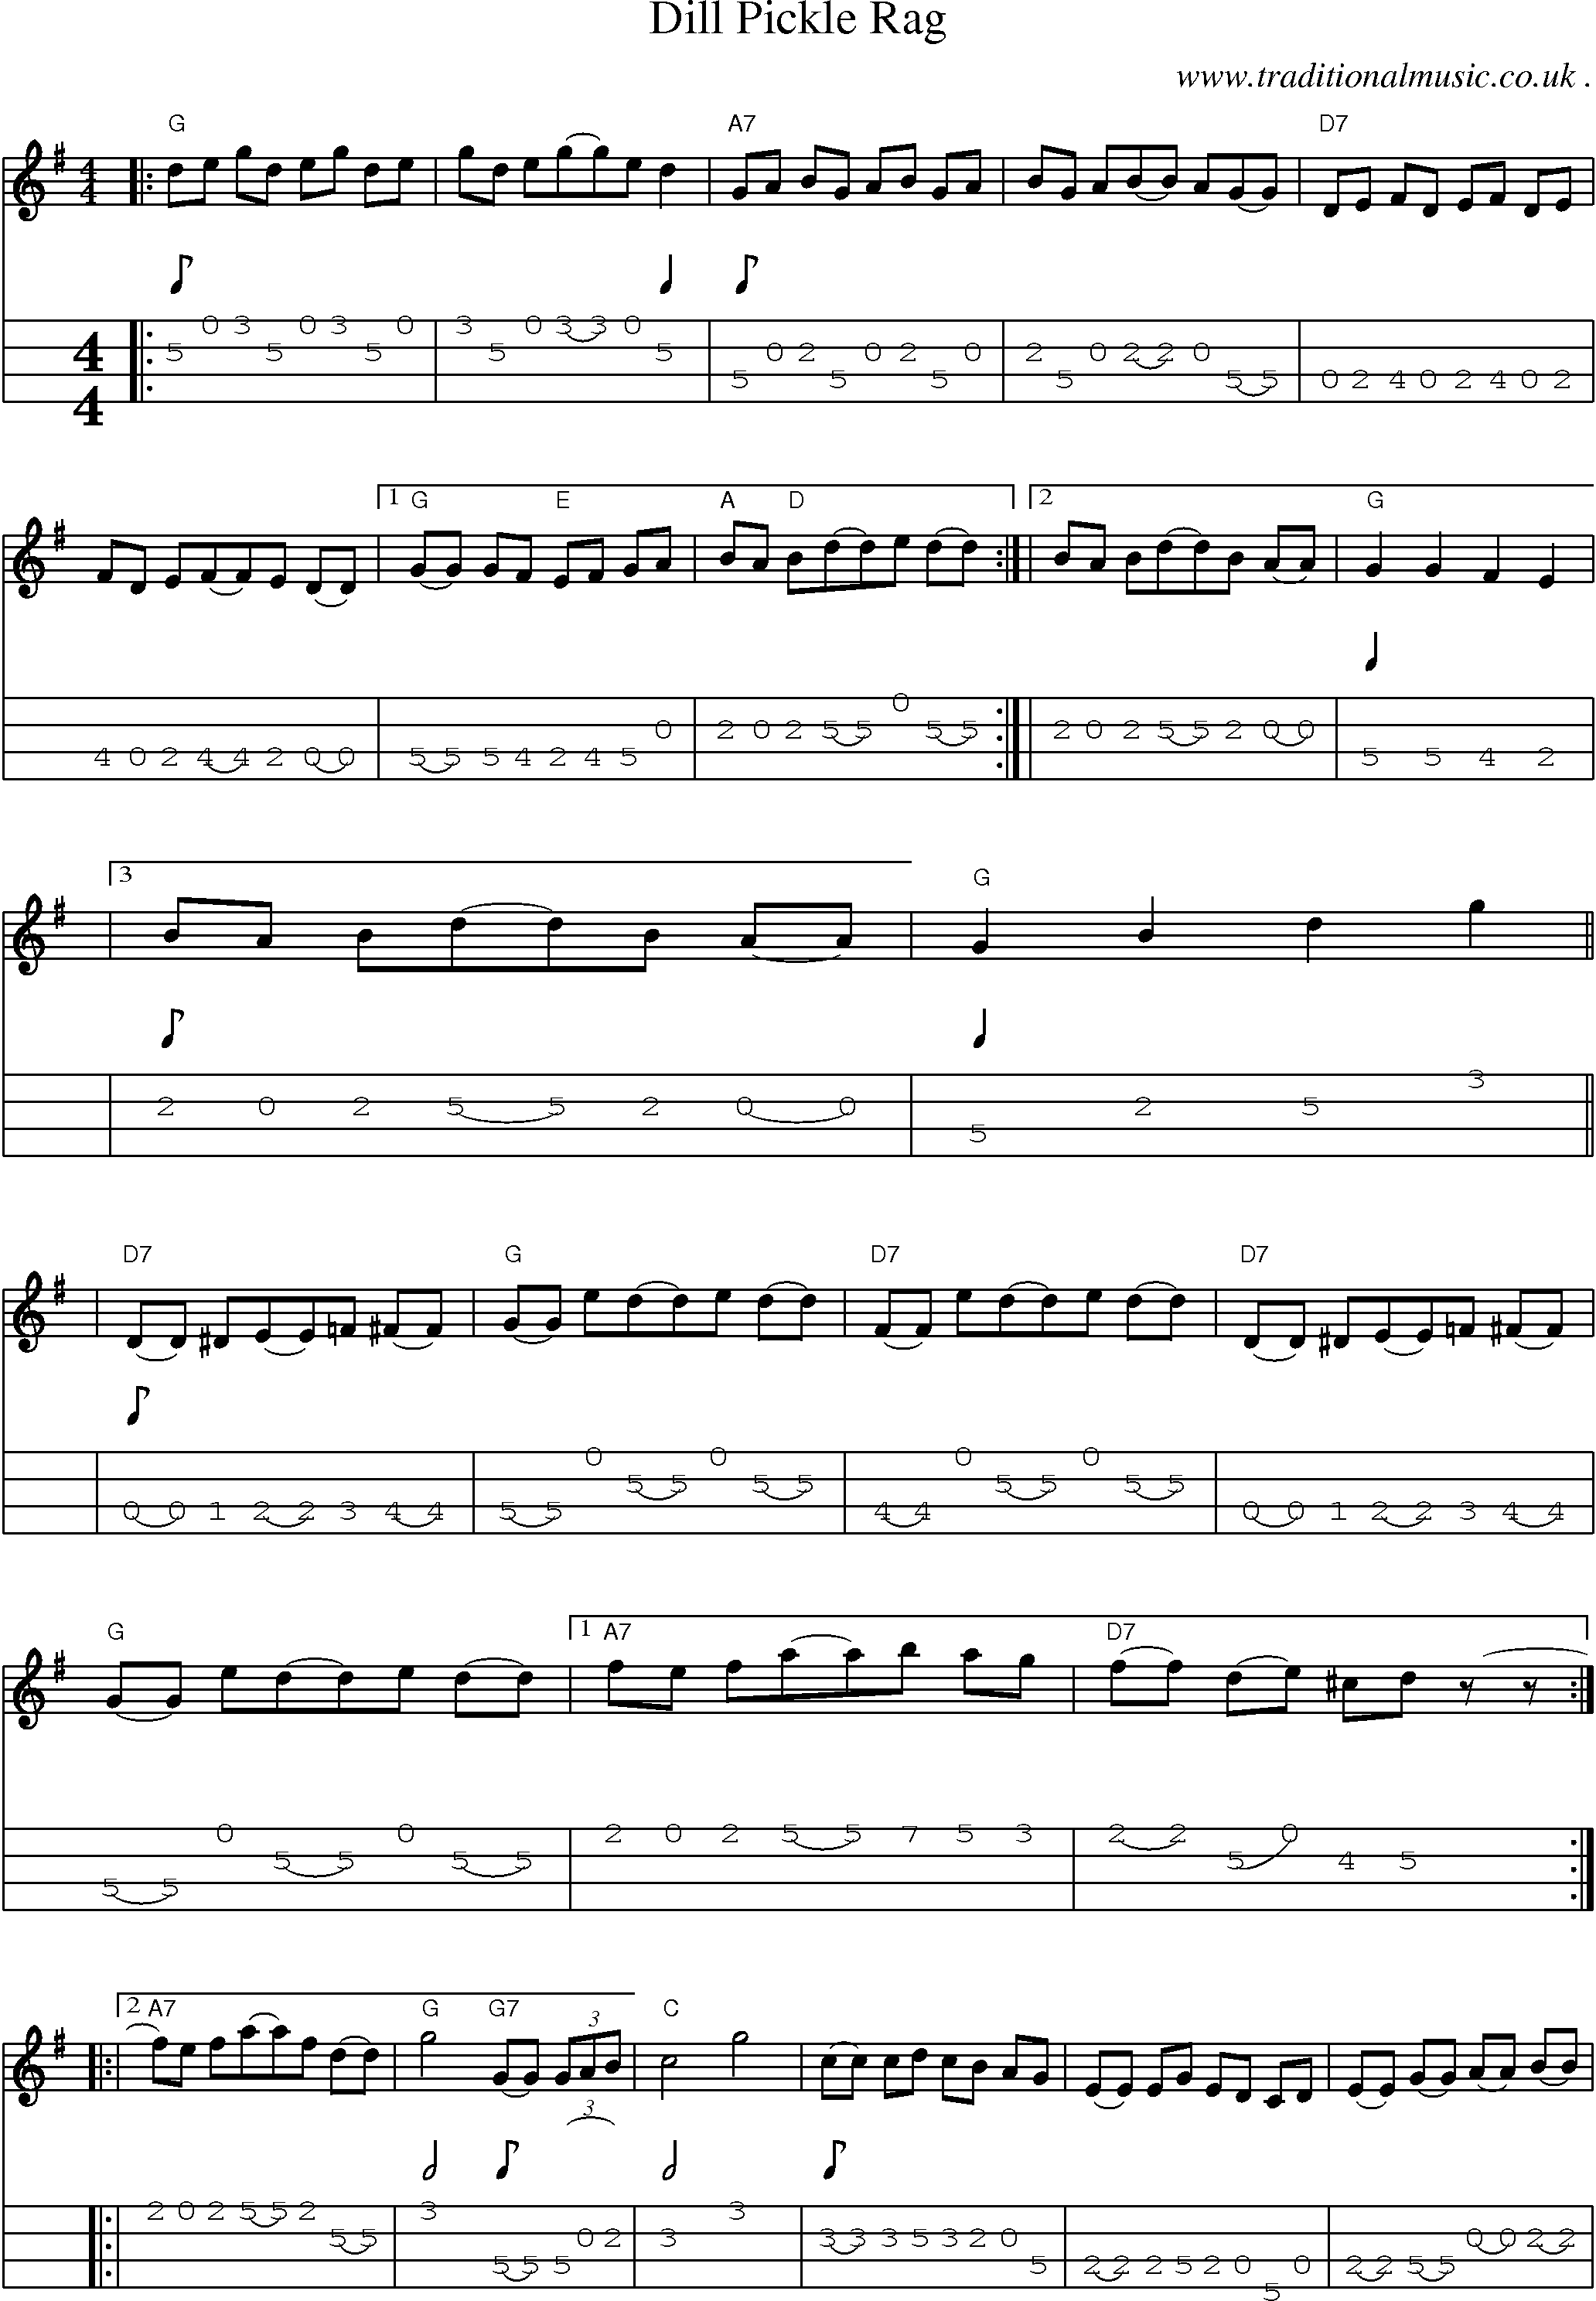 Music Score and Mandolin Tabs for Dill Pickle Rag